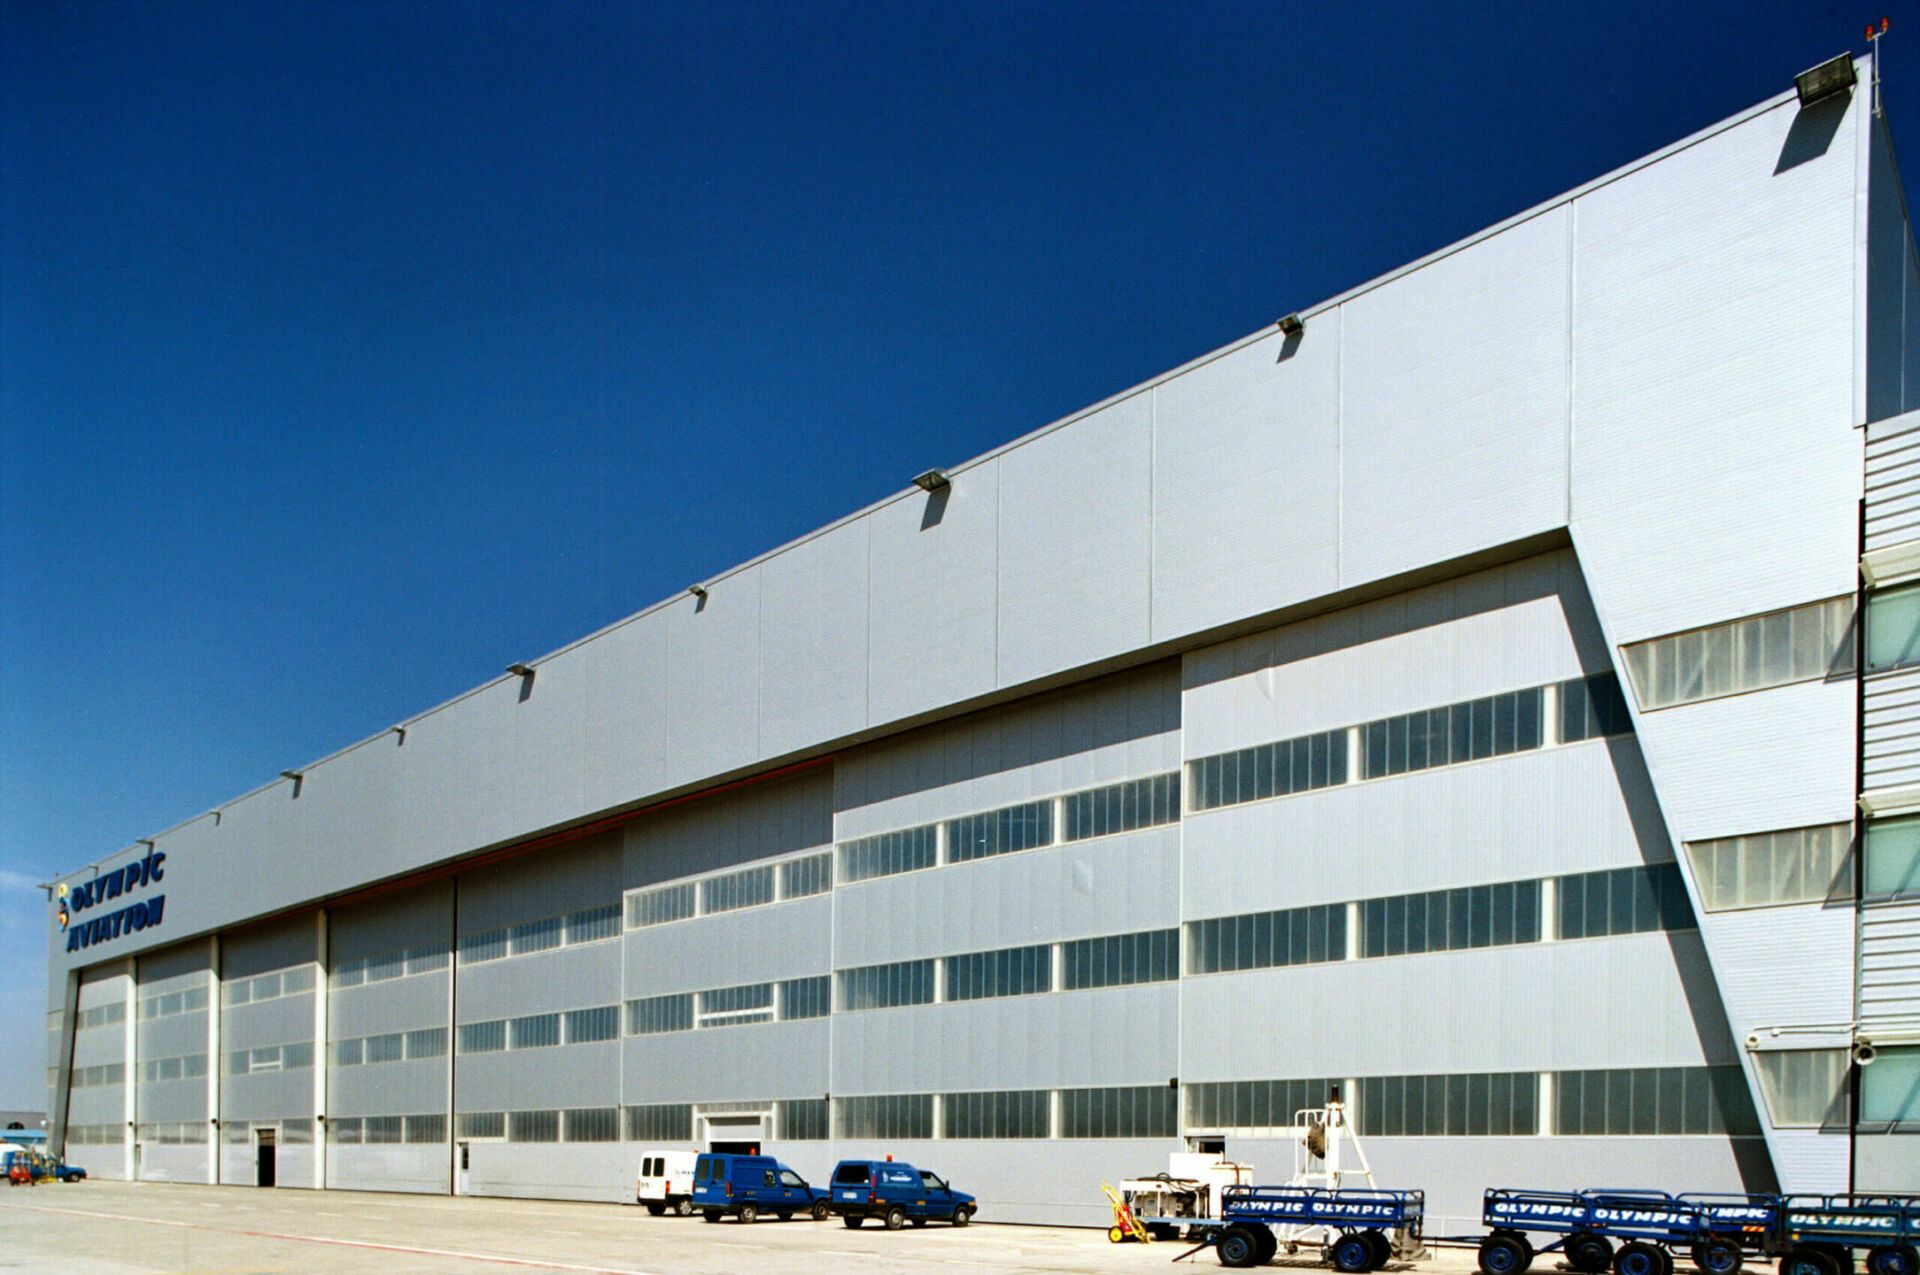 “Olympic Aviation” Complex image 2